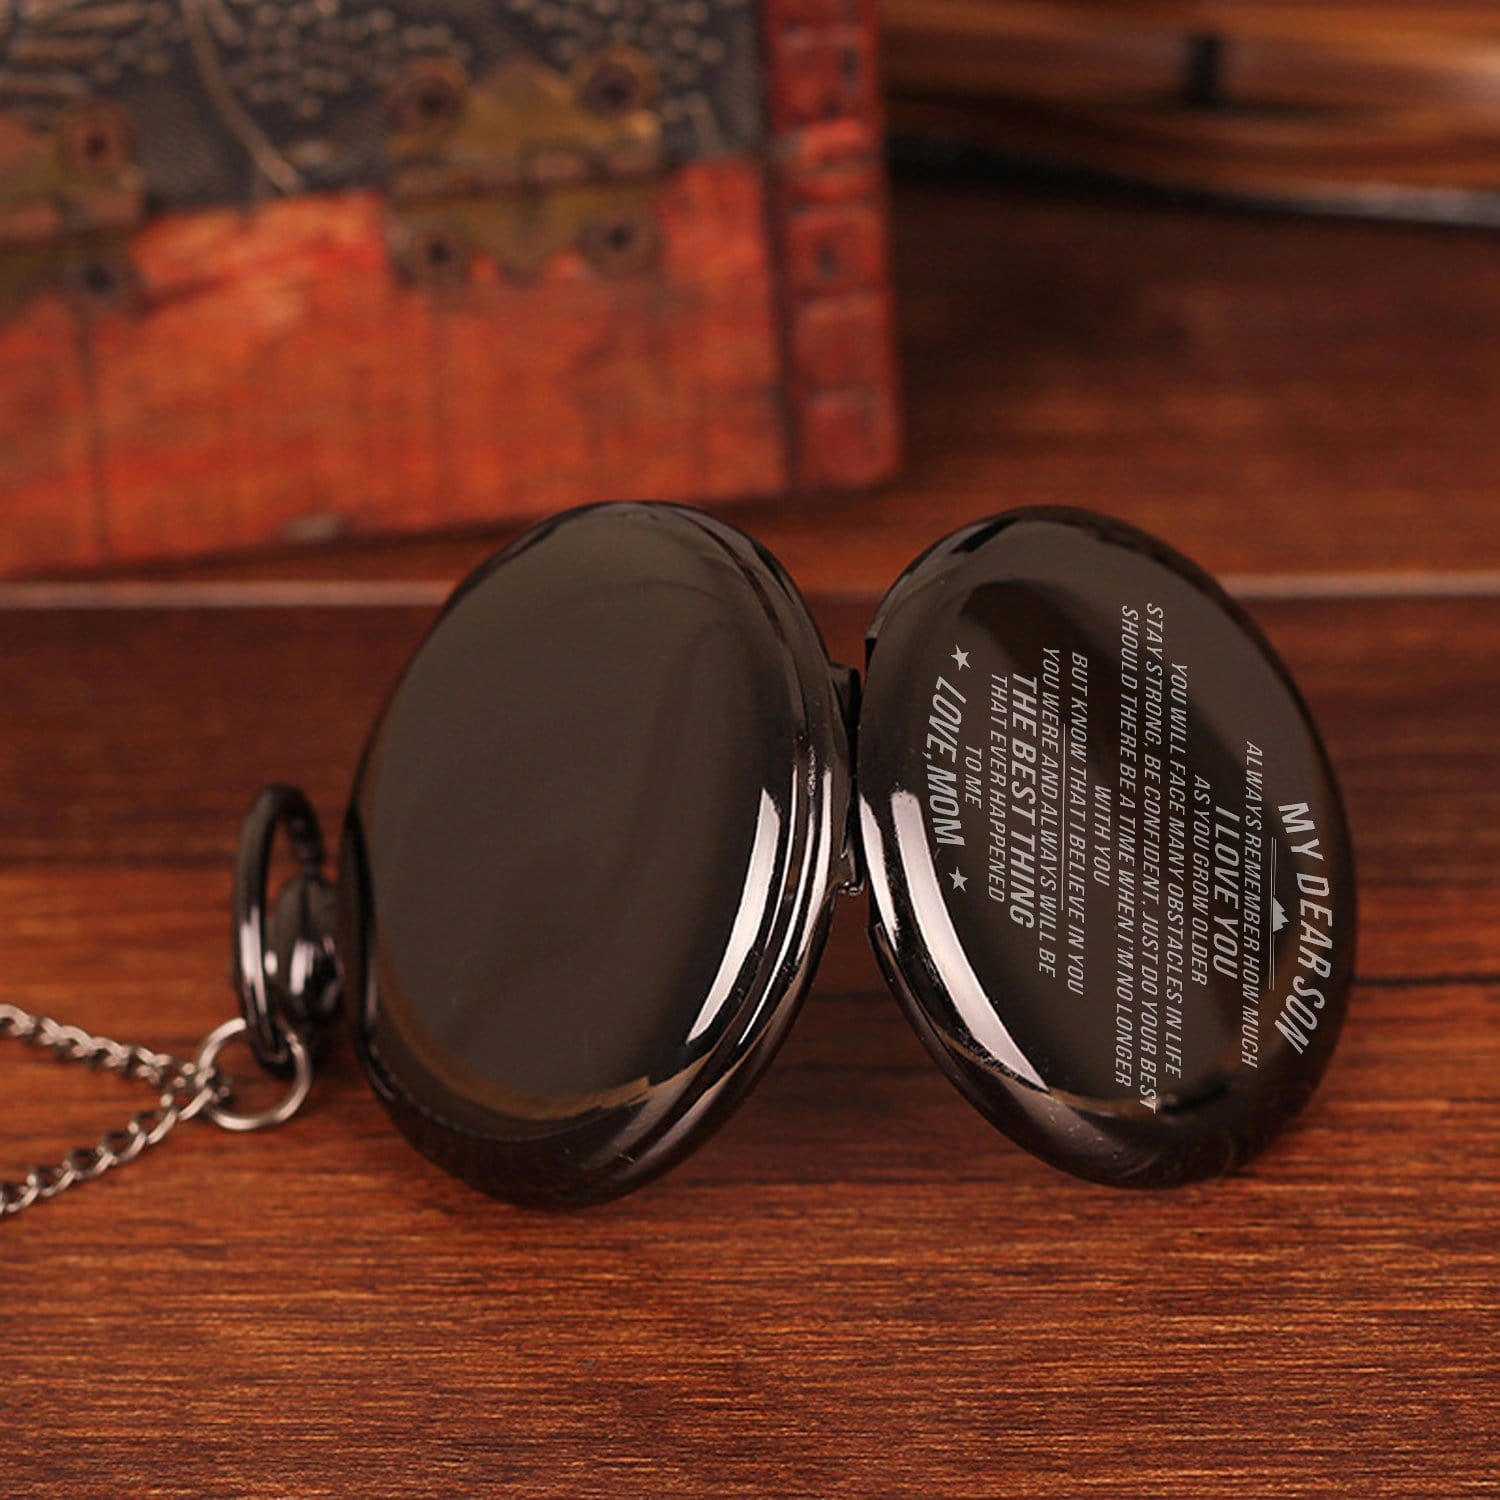 Pocket Watches Mom To Son - The Best Thing To Me Pocket Watch GiveMe-Gifts